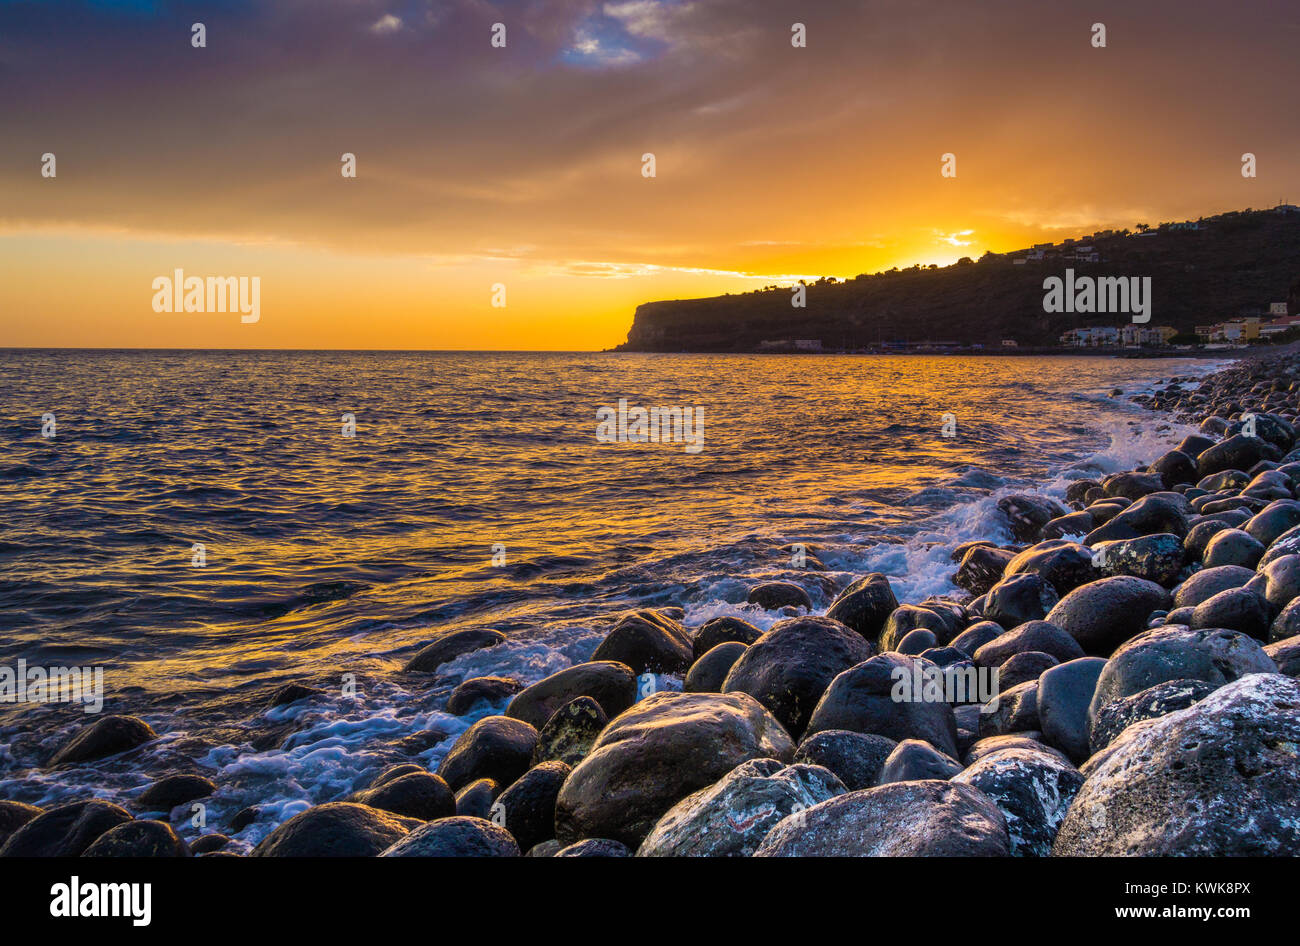 Panorama view of amazing ocean scenery with rocks on a beach in beautiful golden evening light at sunset with blue sky, clouds and sunlight lens flare Stock Photo